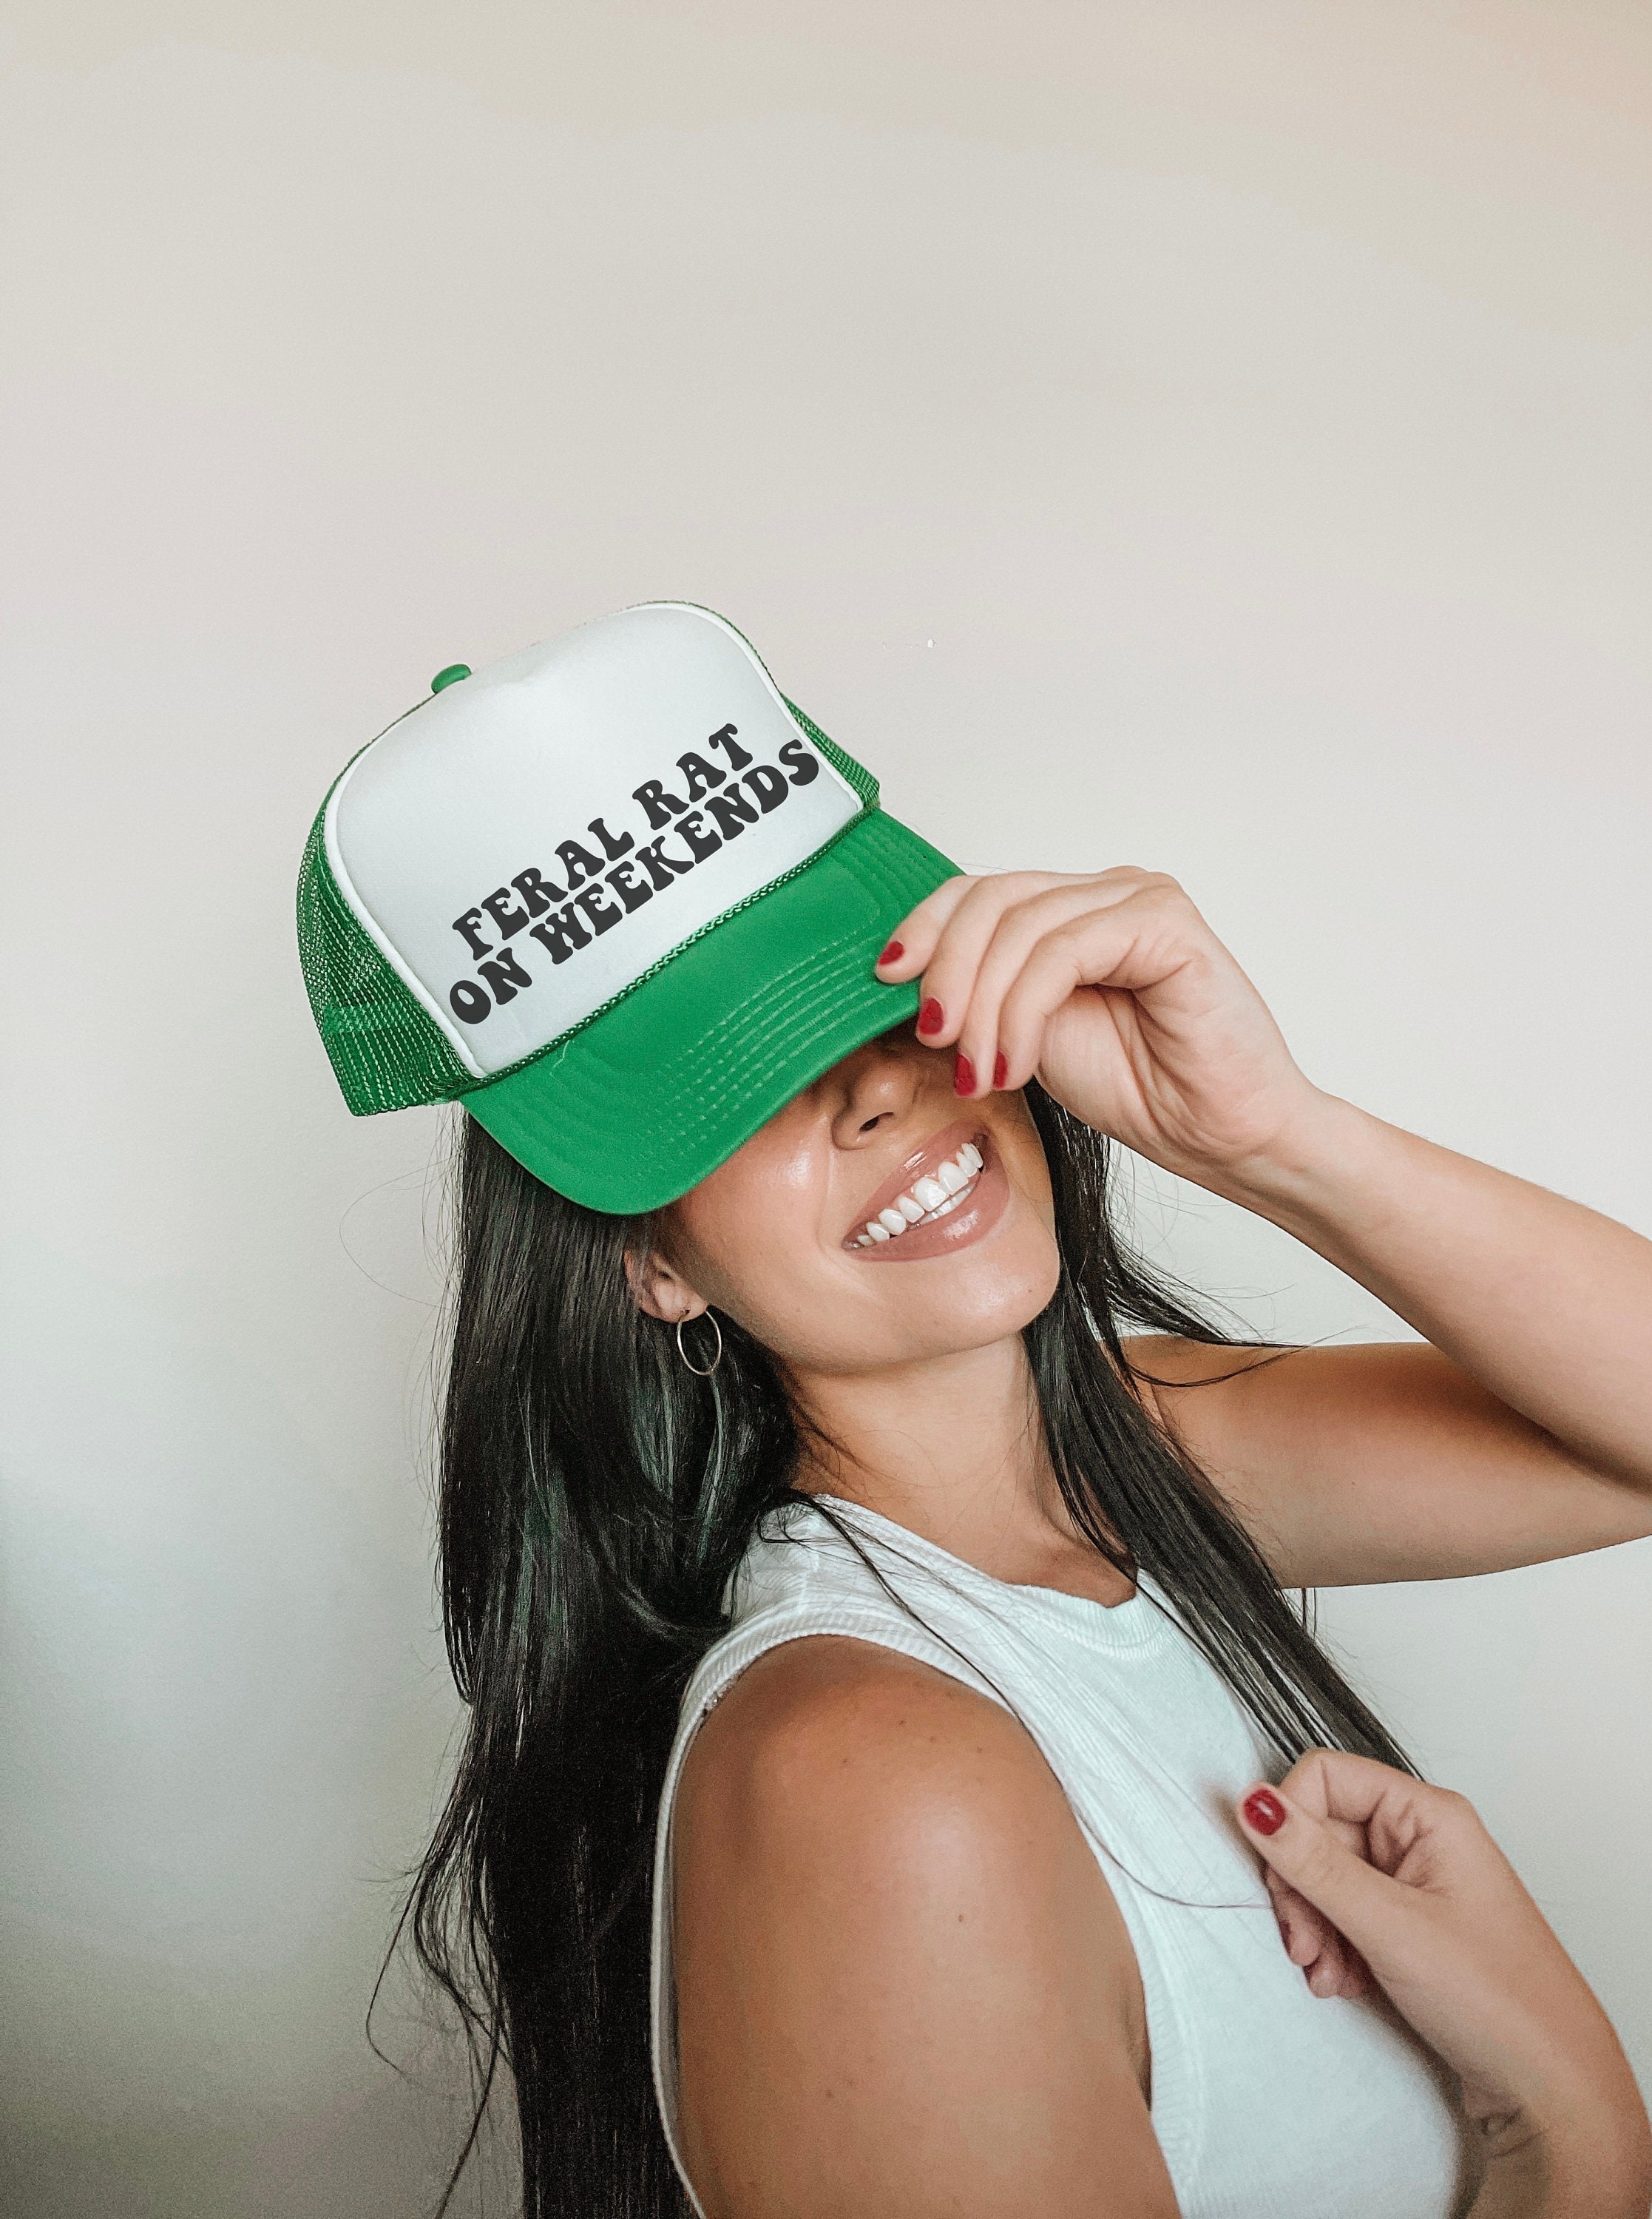 Show Up And Throw Up Funny Trucker Hat | Funny Hat | Lake Hat | Festival Hat